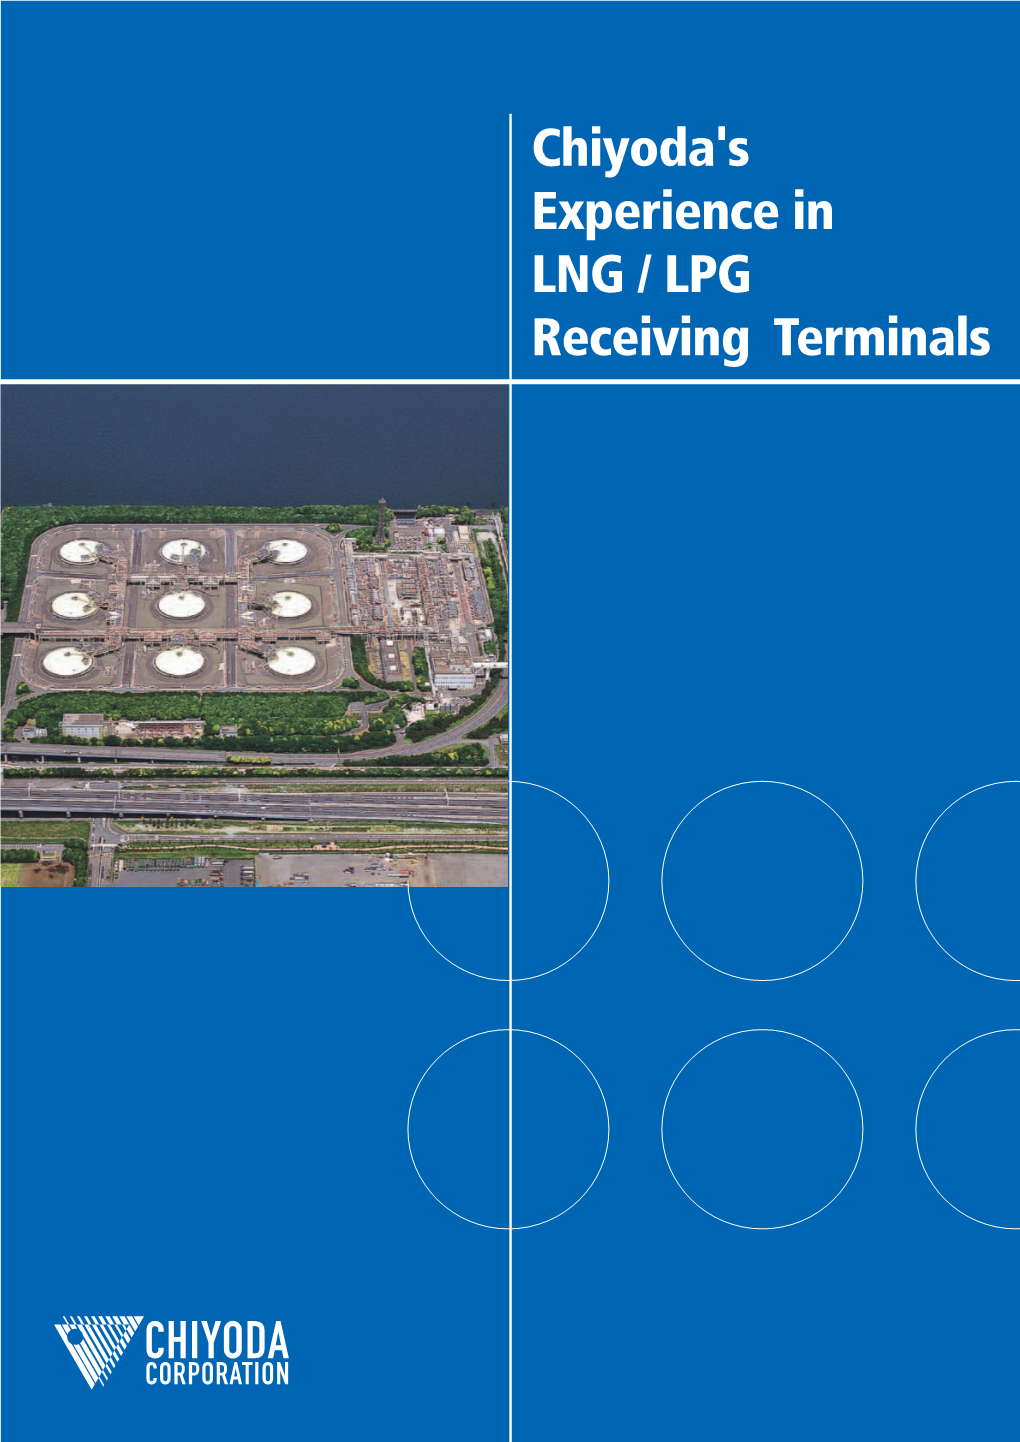 LNG/LPG Receiving Terminal Projects